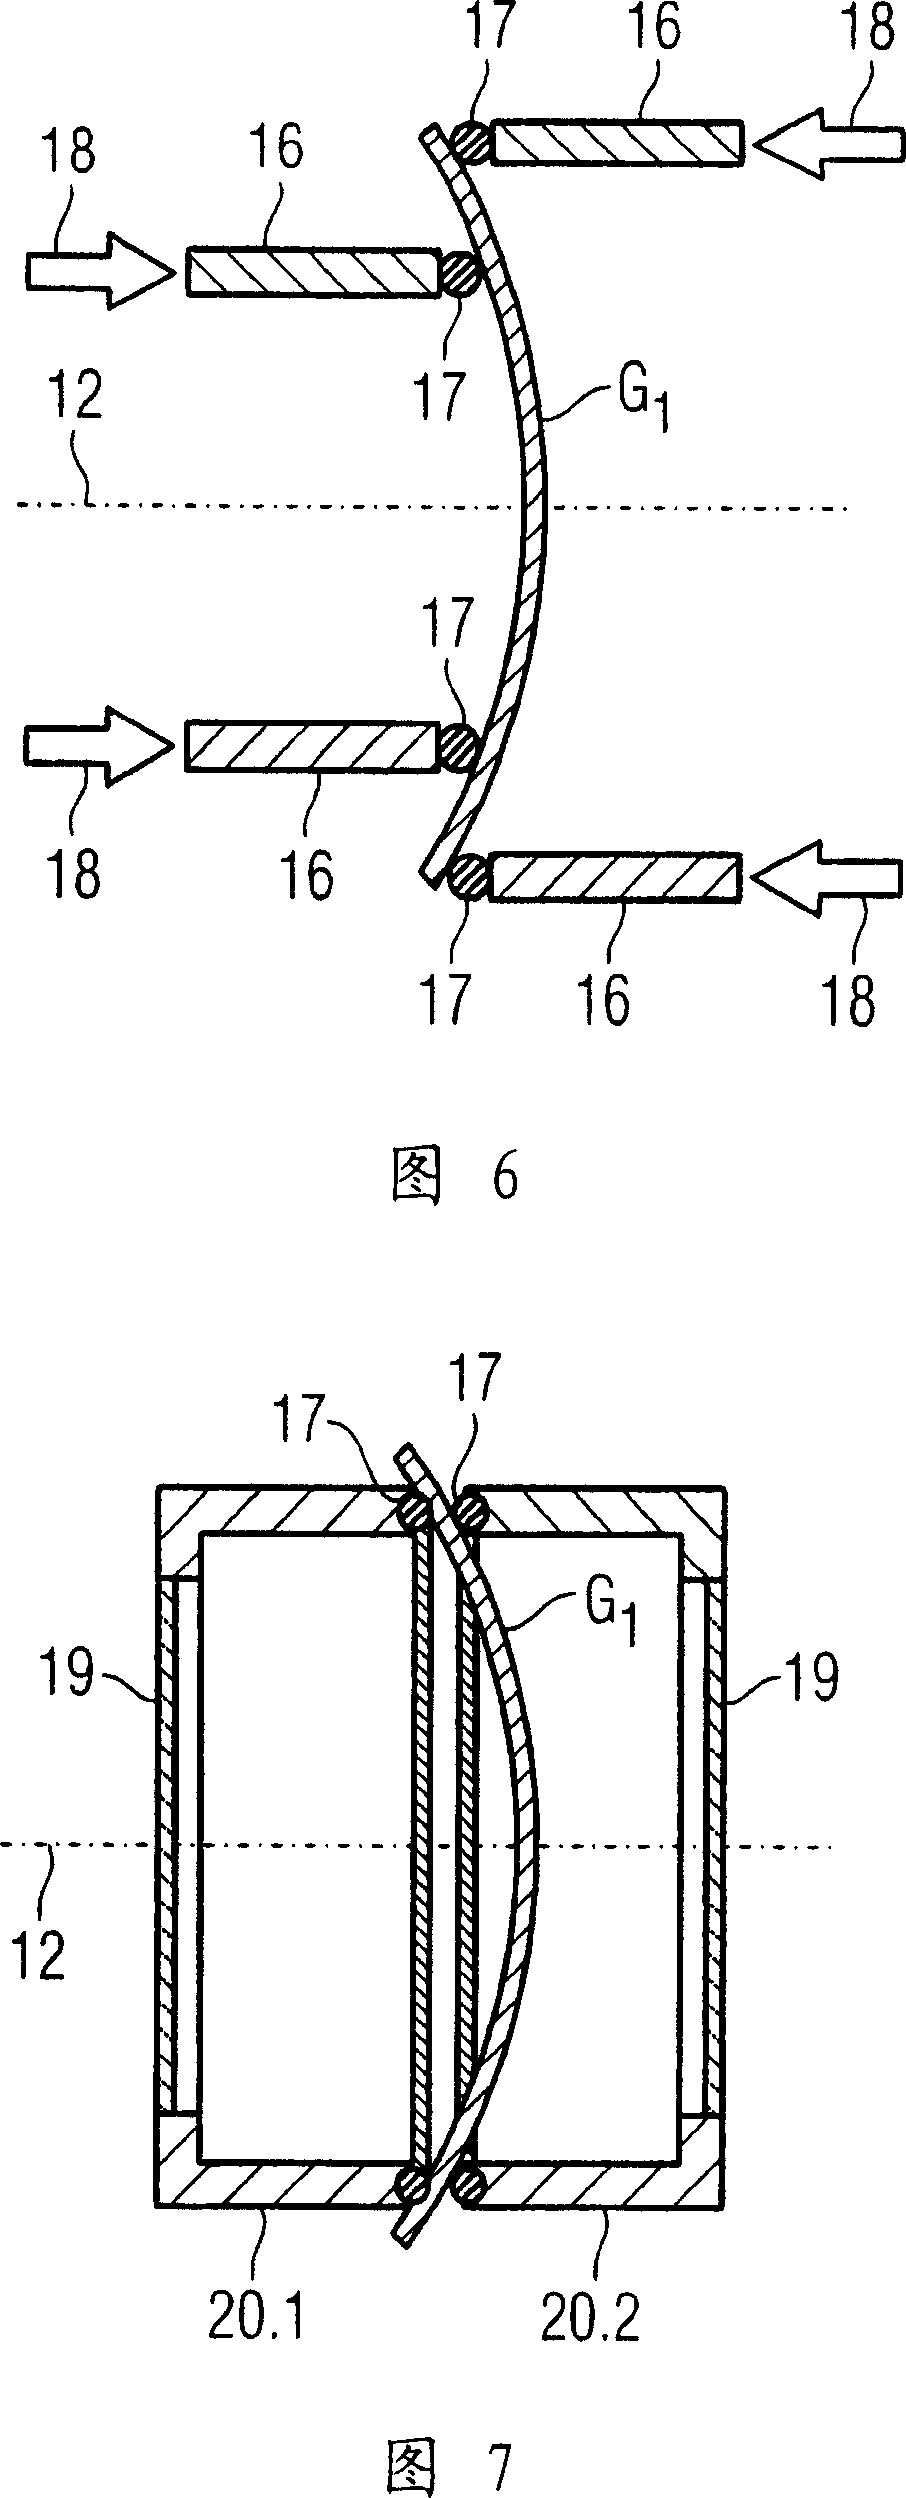 Focus detector arrangement for generating phase-contrast X-ray images and method for this